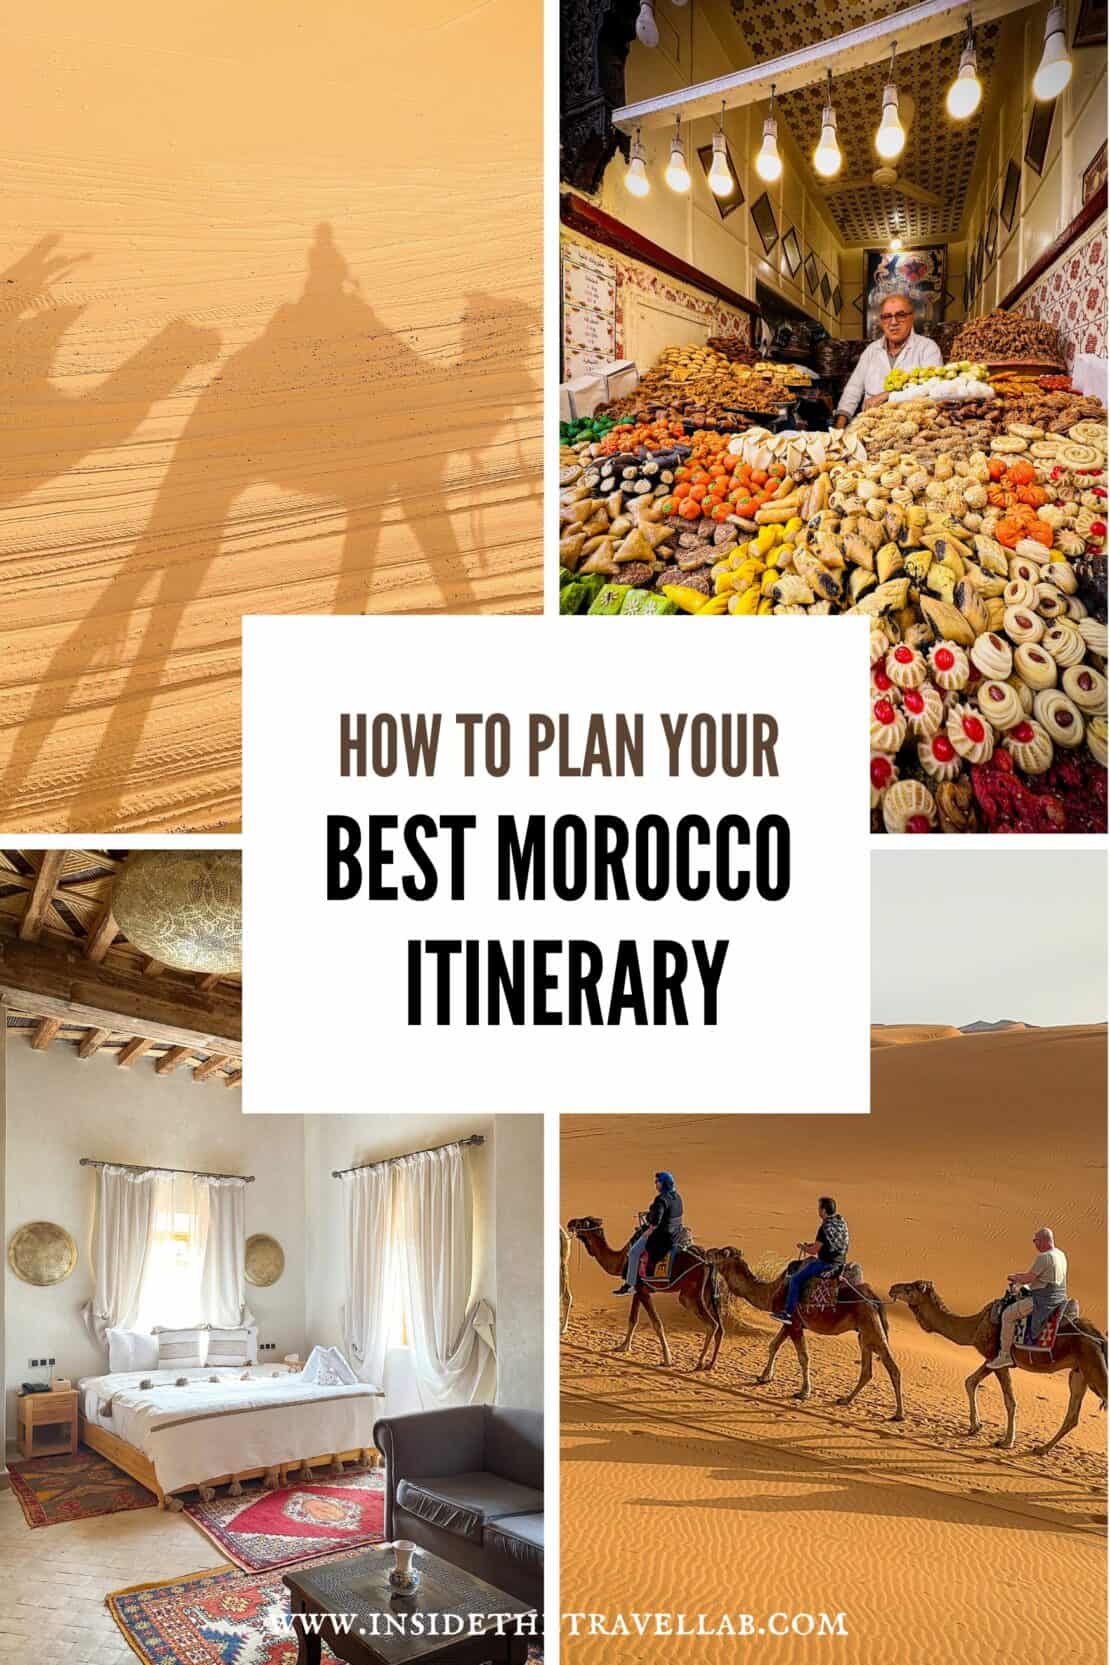 Cover image for how to plan your best Morocco itinerary collage of Moroccan images